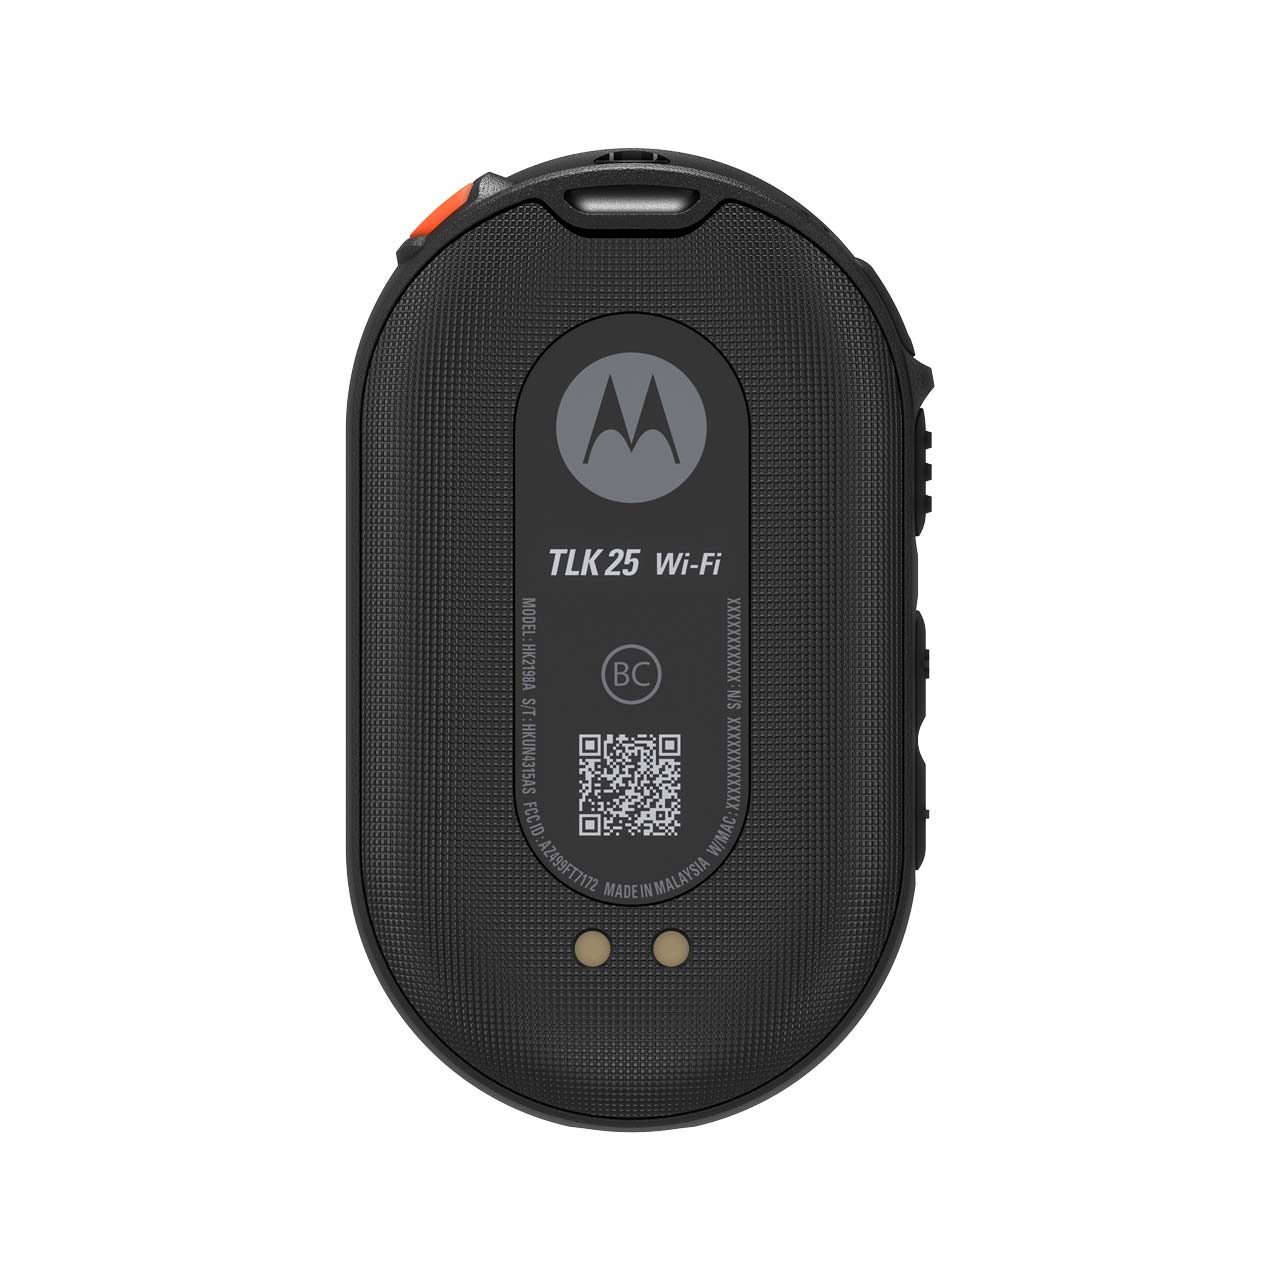 Motorola TLK 25 WAVE PTX radio WiFi with charging cable and earpiece HK2205A